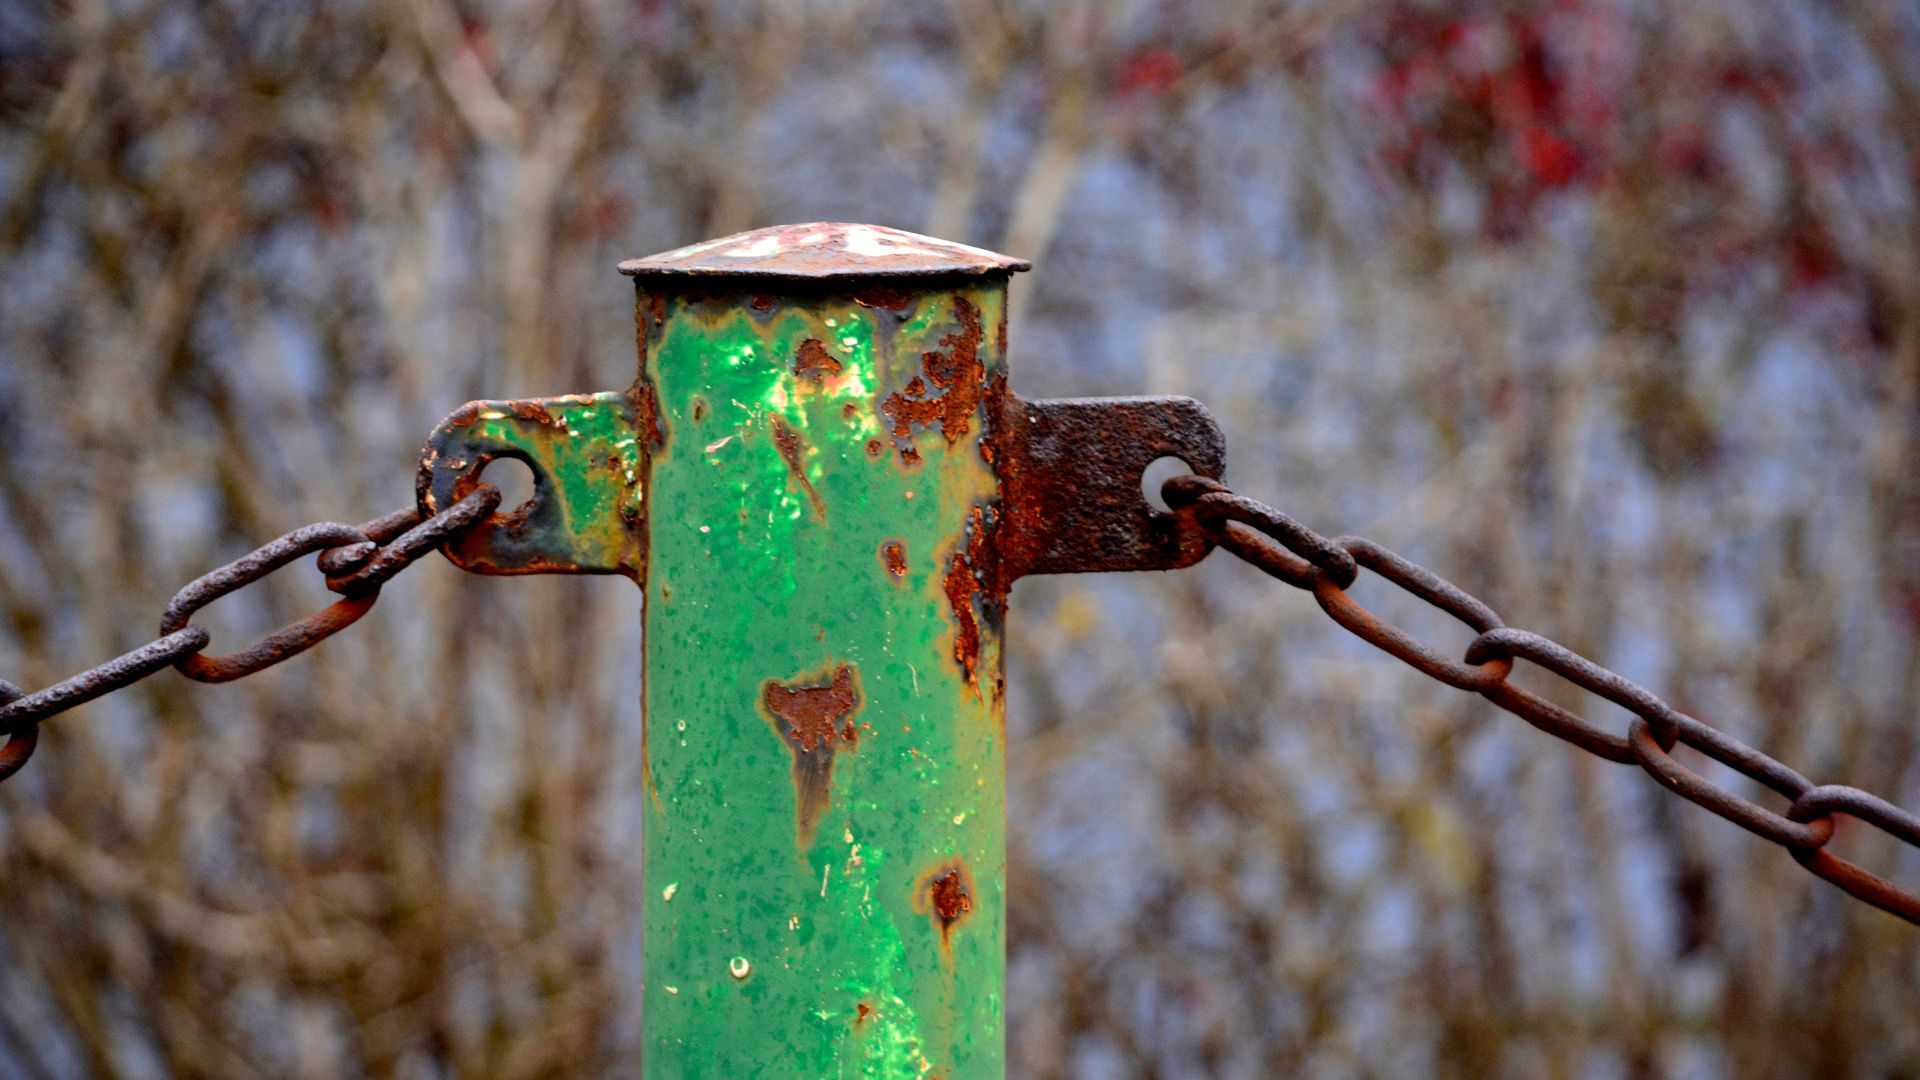 A green pole with an old chain. When the paint has worn away, the metal has turned red.